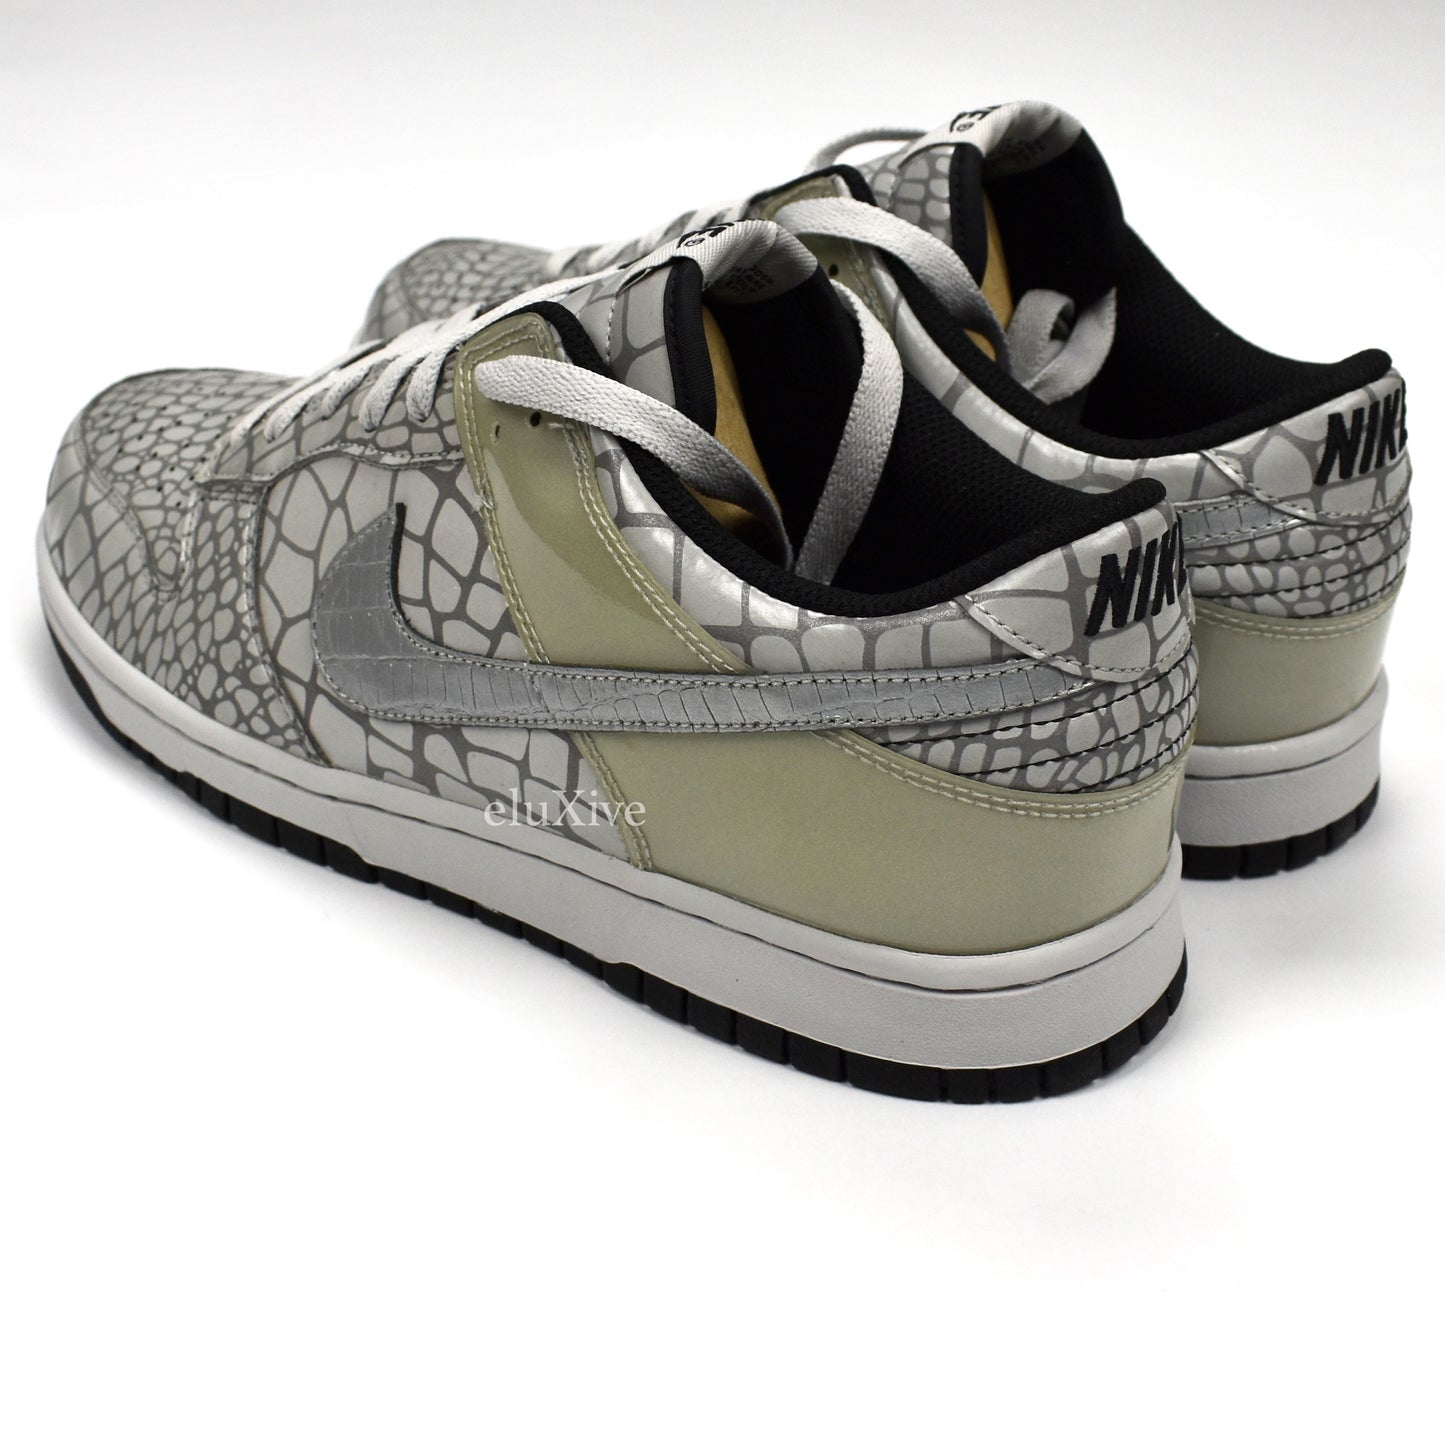 Nike - Dunk Low 'Asia Snake' Reflective